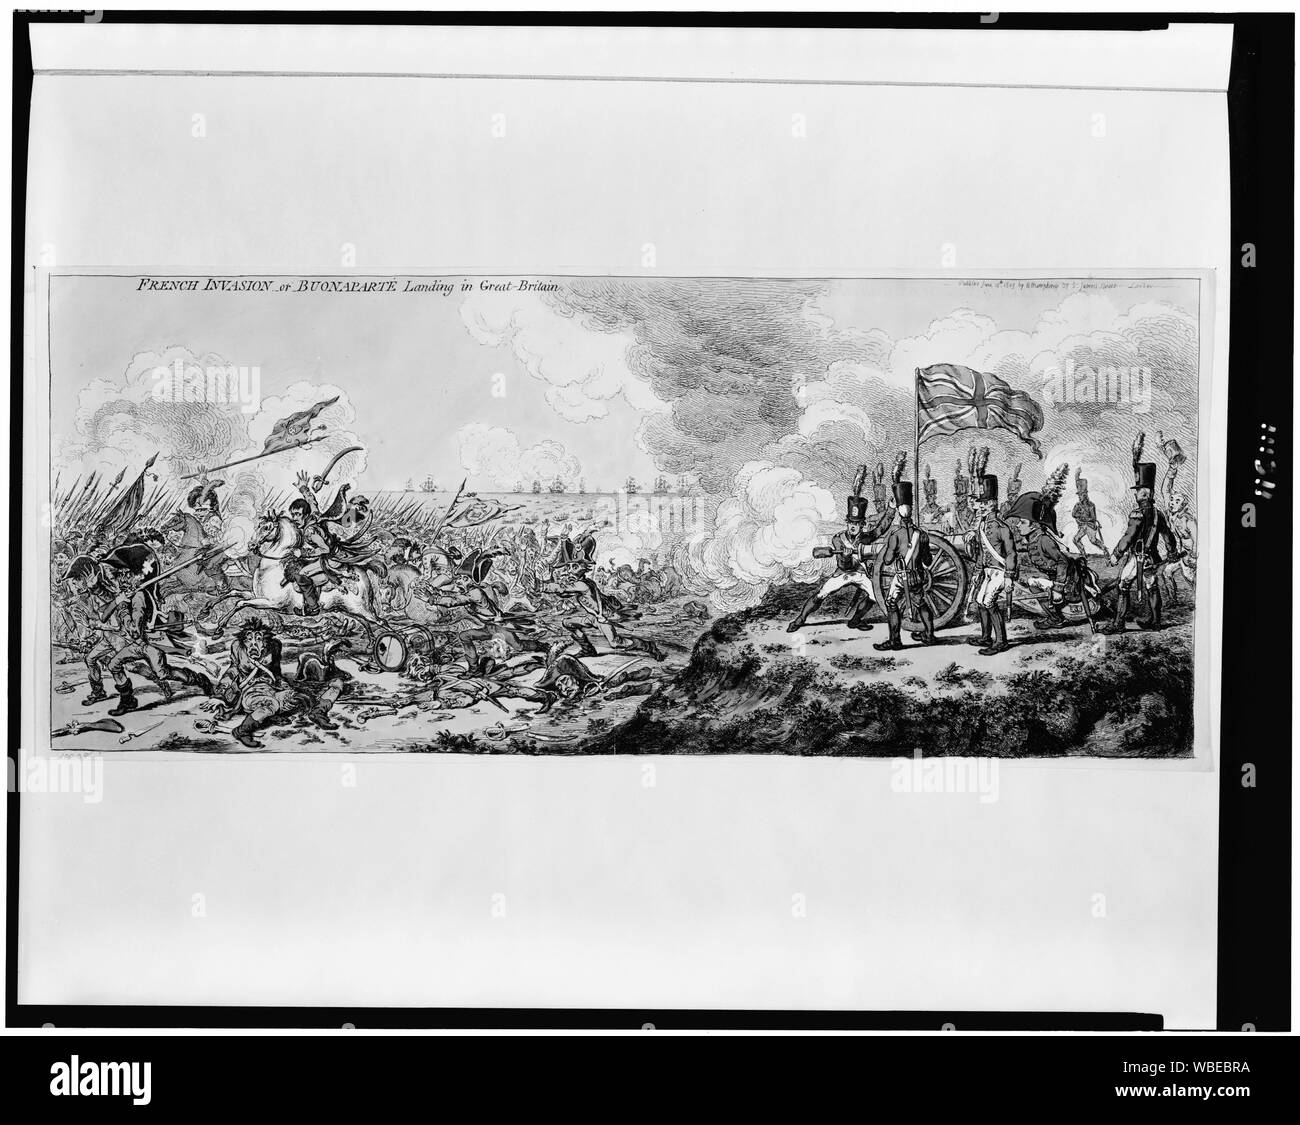 French invasion - or - Buonaparte landing in Great-Britain Abstract: Cartoon showing Napoleon and his army, on seashore, fleeing from English soldiers with a British flag and two cannons on a low sandy cliff. Stock Photo